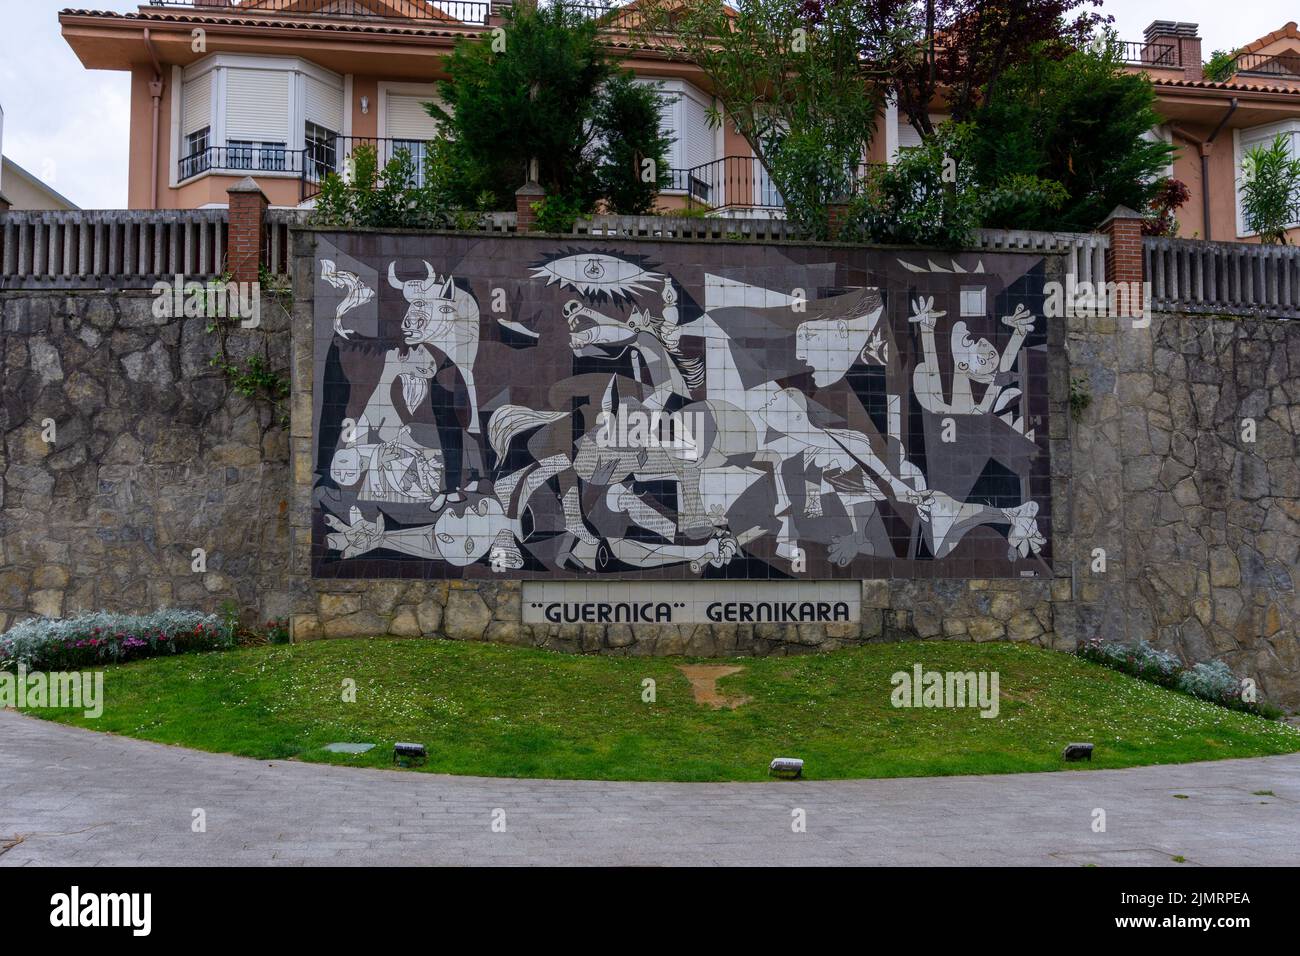 View of the Guernica Mural by Picasso in the historic city center of Guernica Stock Photo